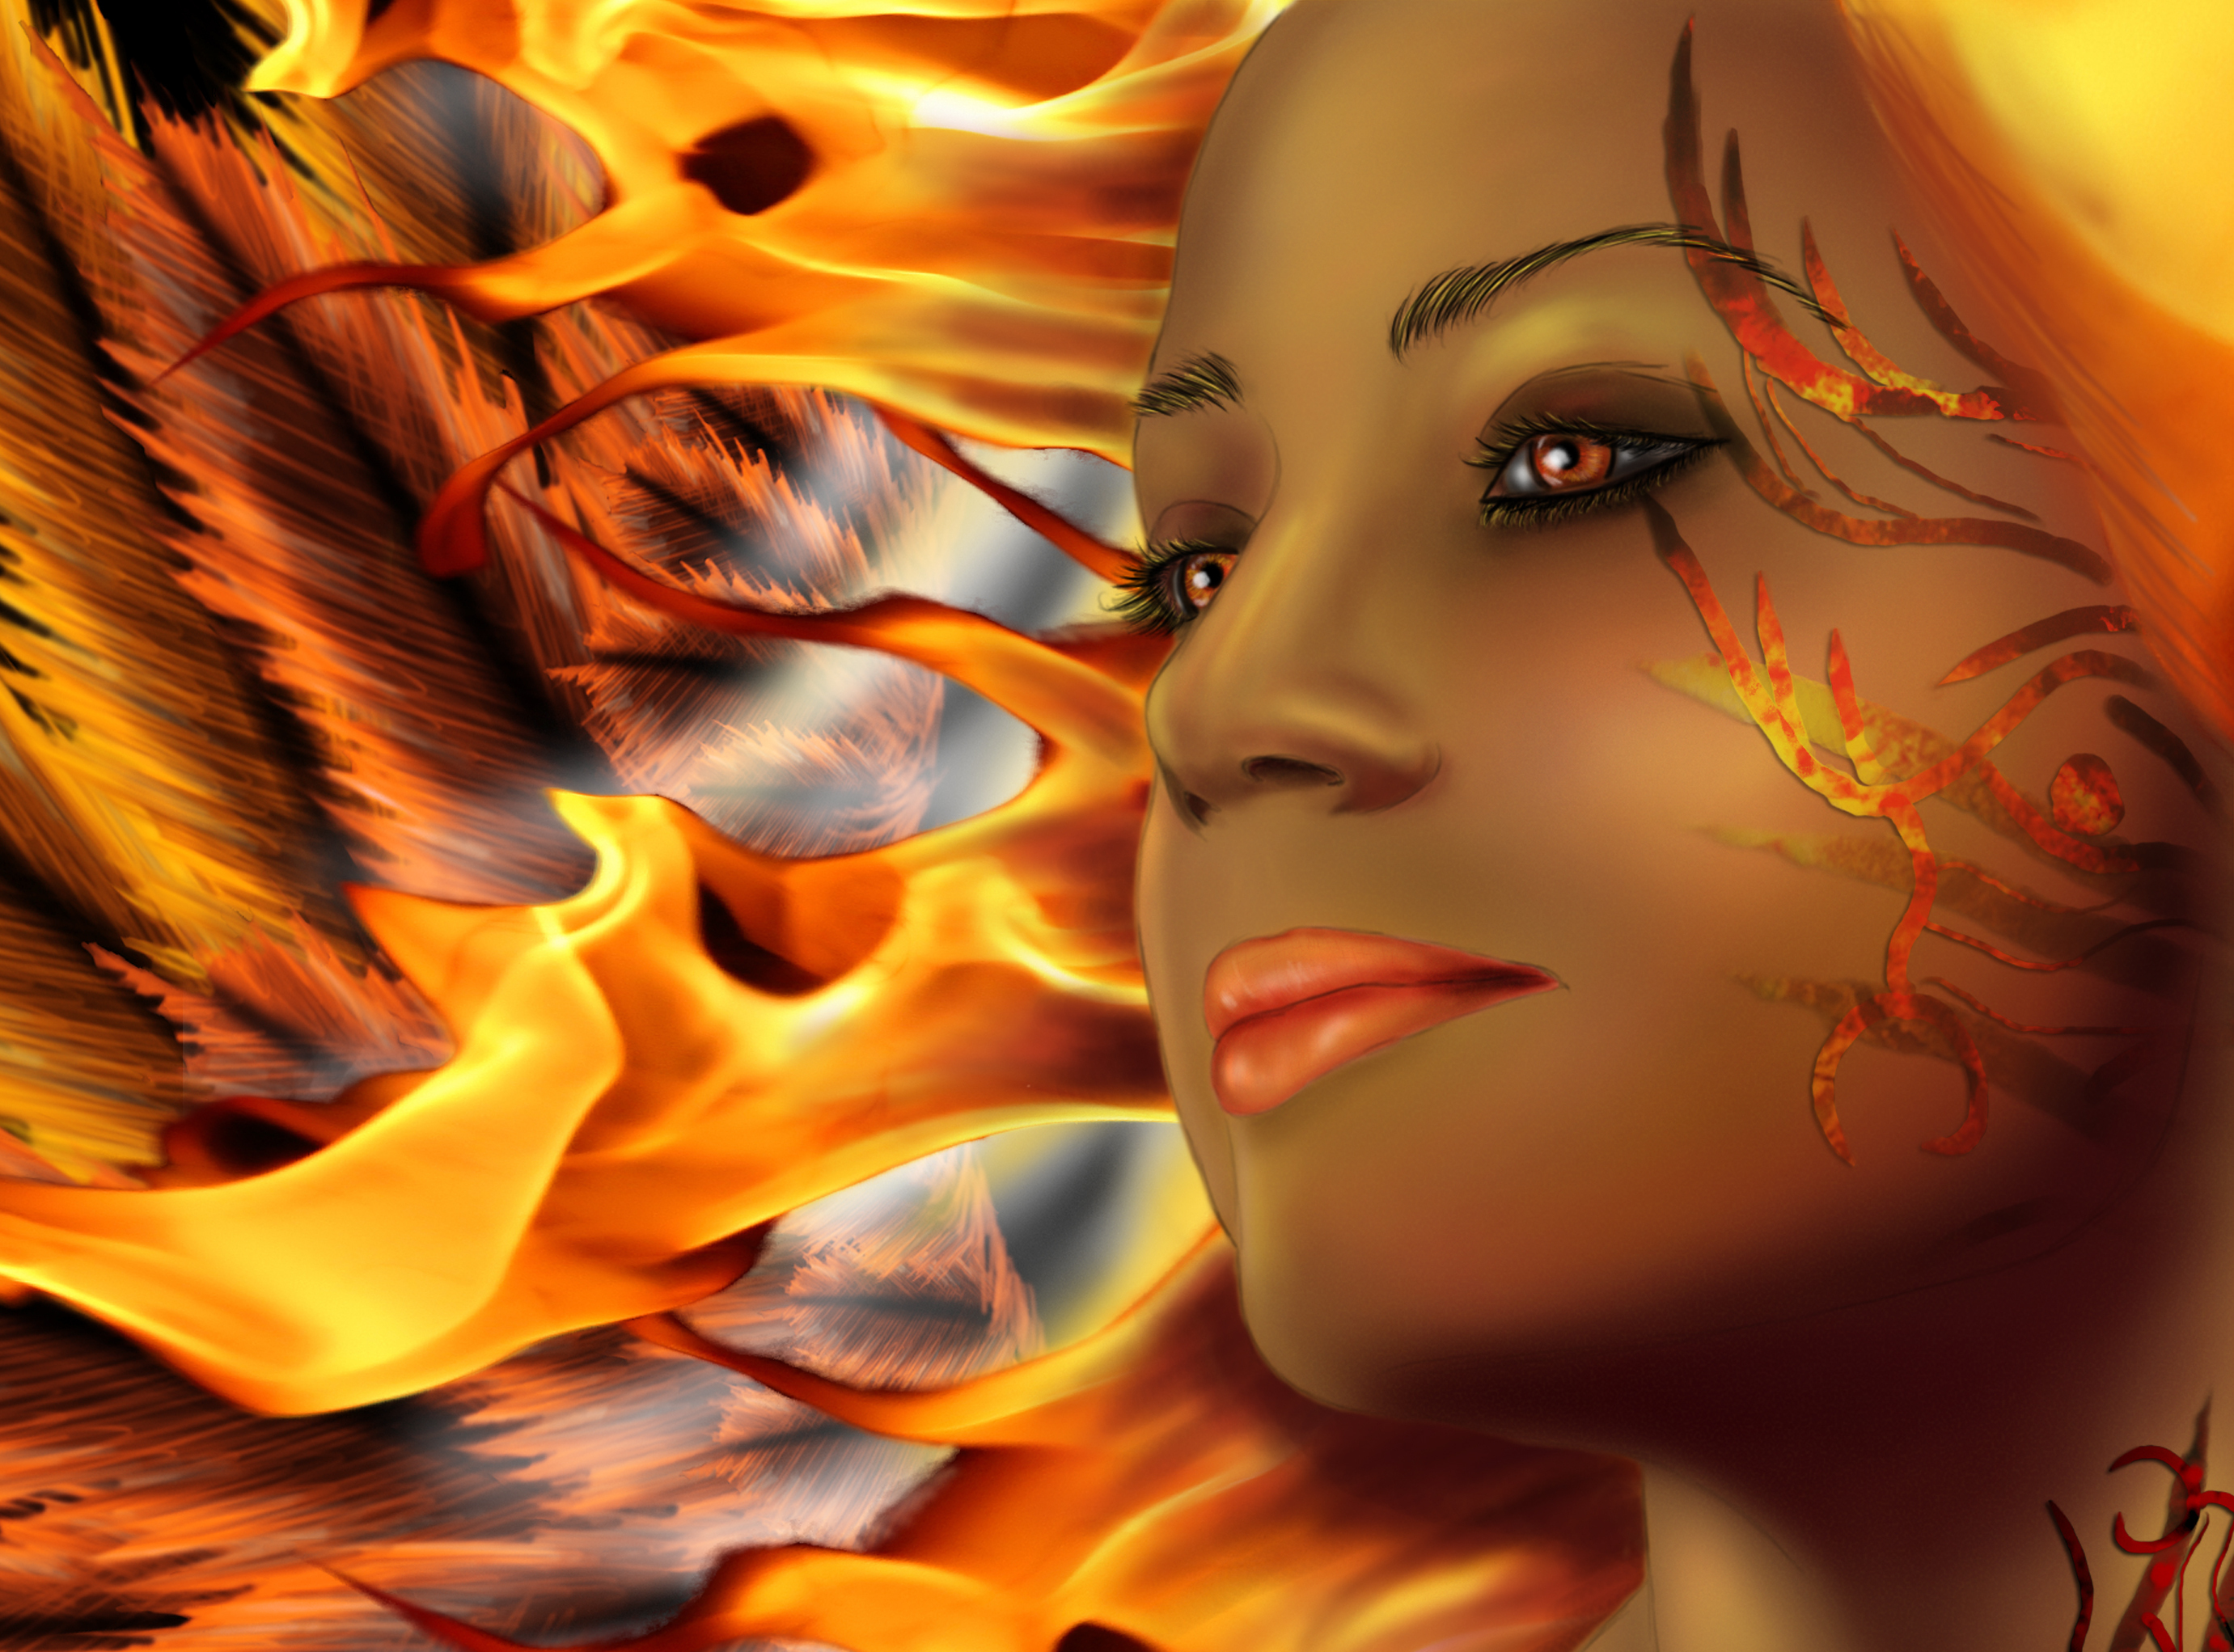 Mobile wallpaper: Fantasy, Fire, Colors, Face, Women, Orange Eyes, 750052 download the picture for free